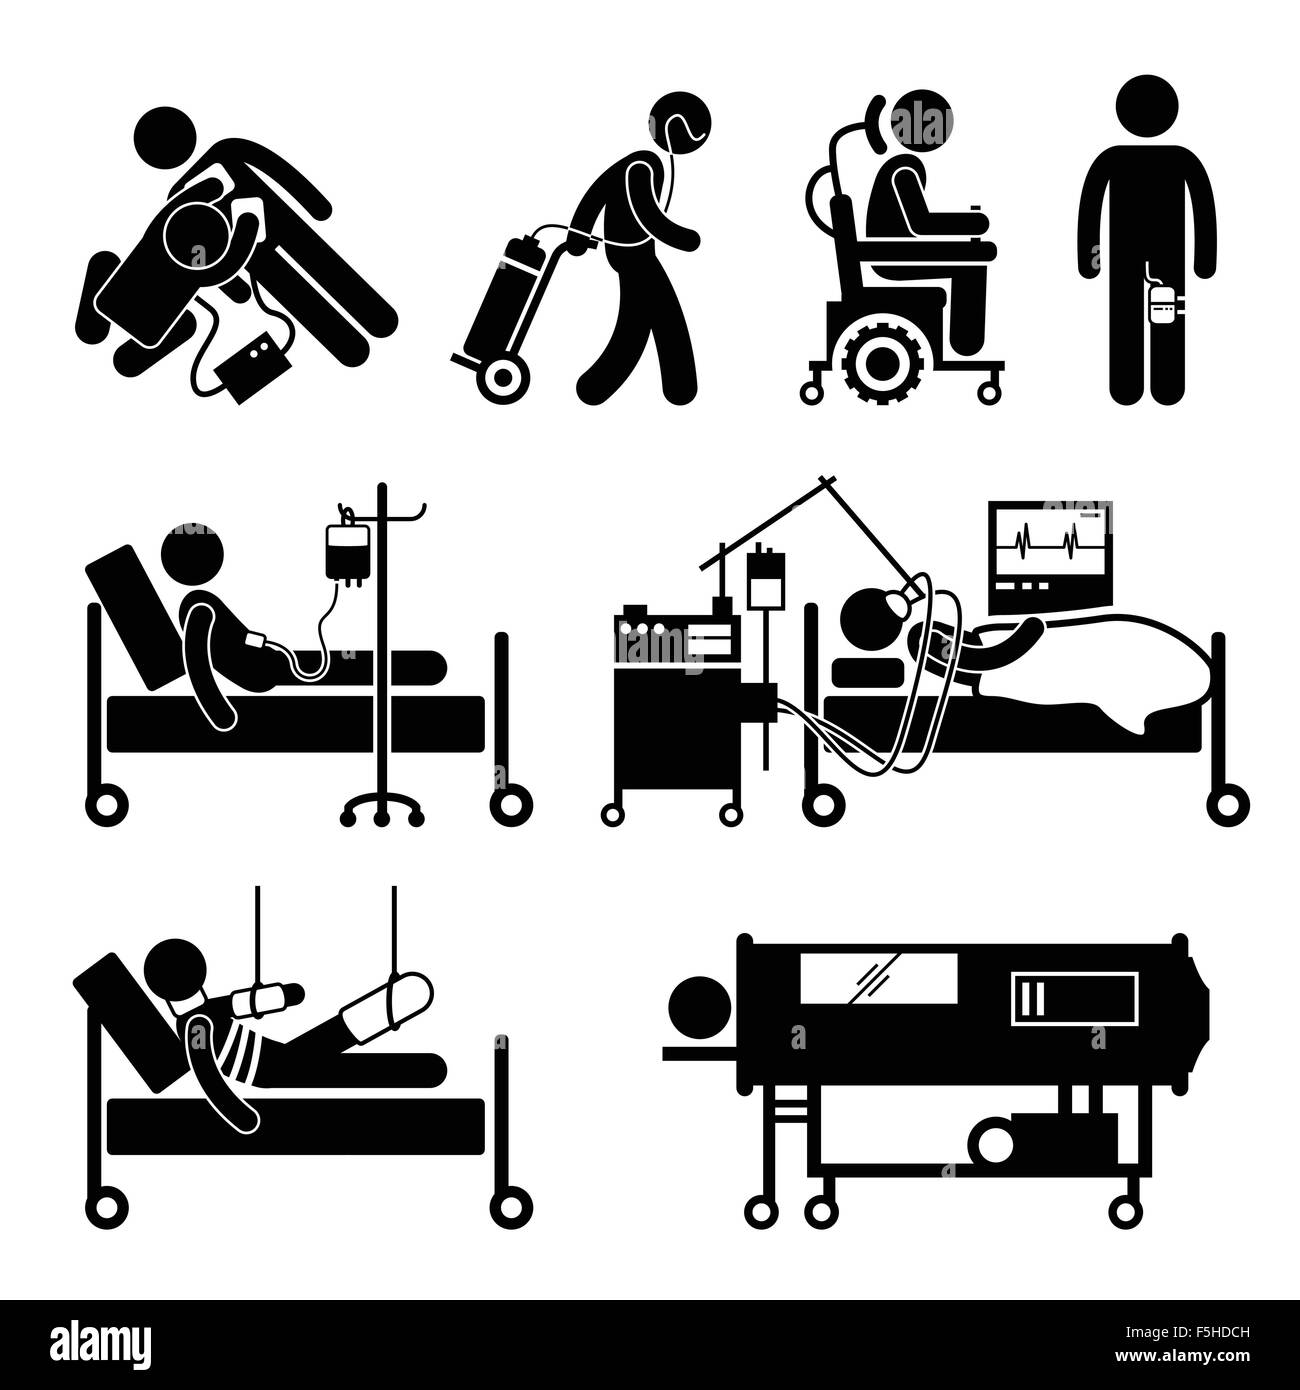 Life Support Equipments Stick Figure Pictogram Icons Stock Vector